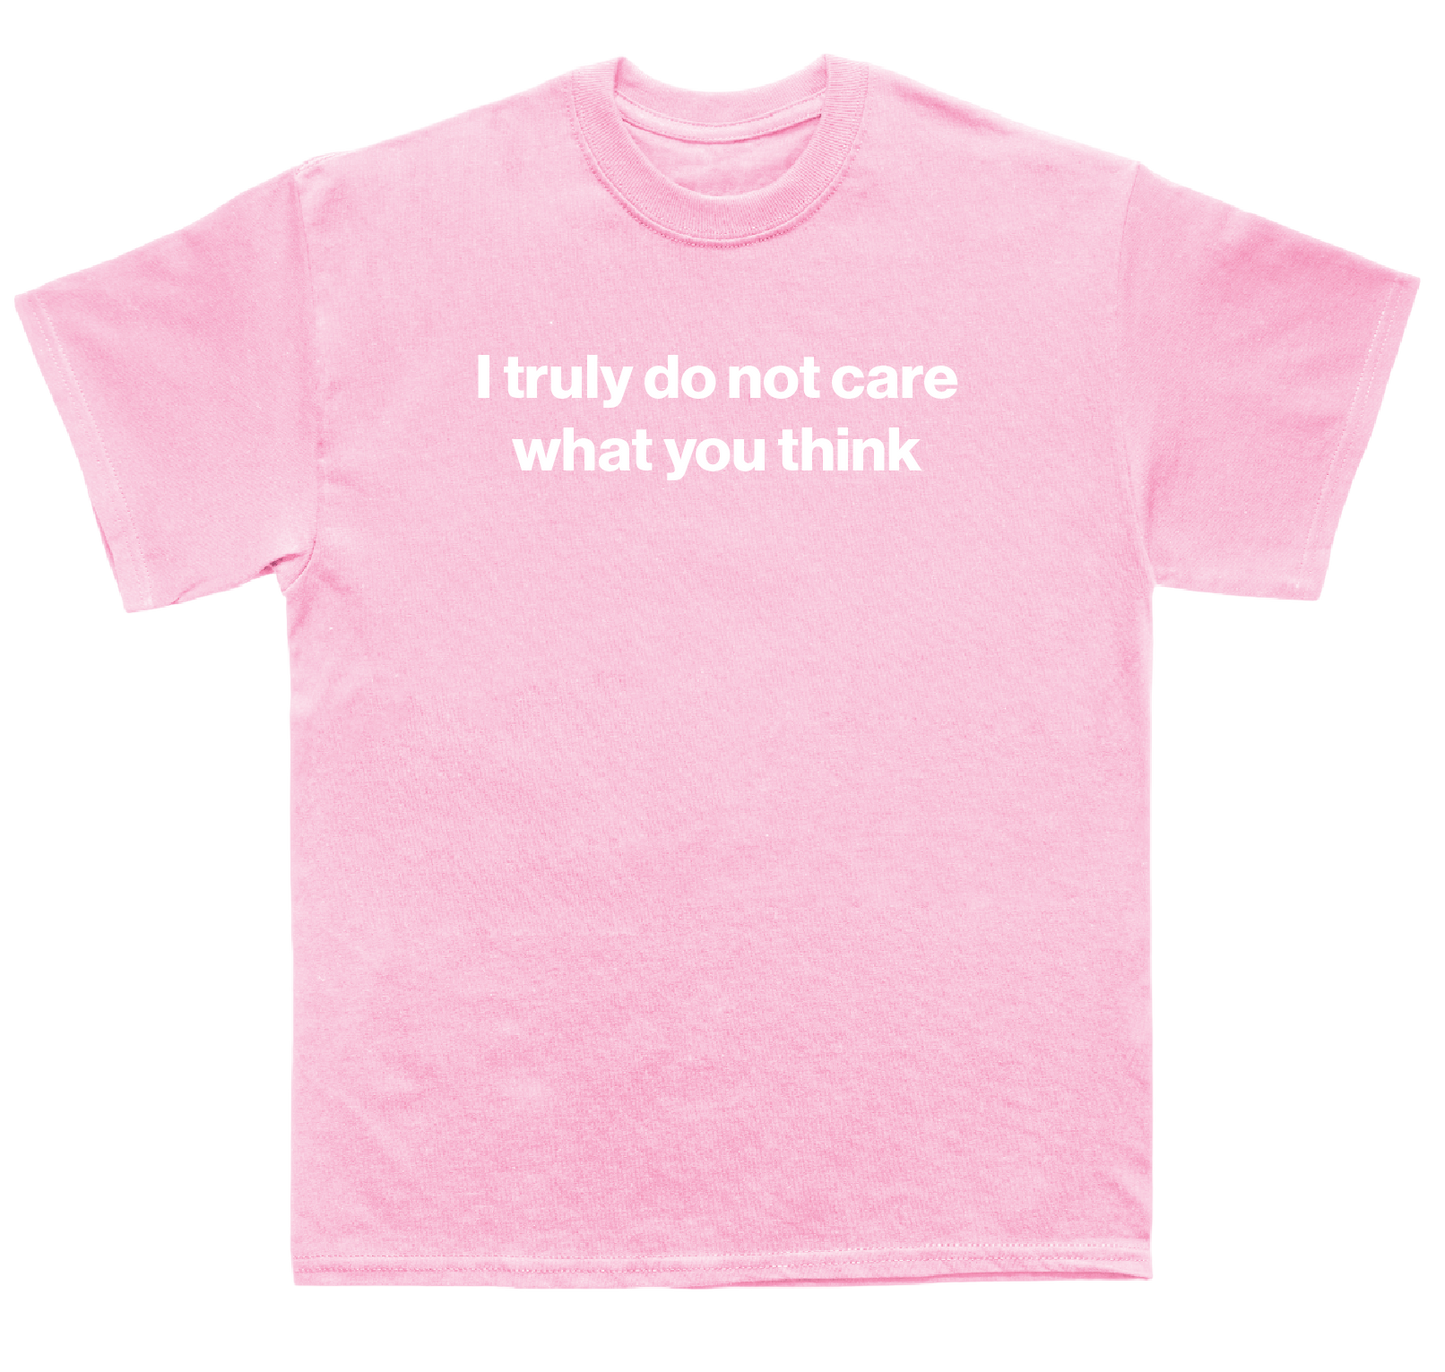 I truly do not care what you think shirt